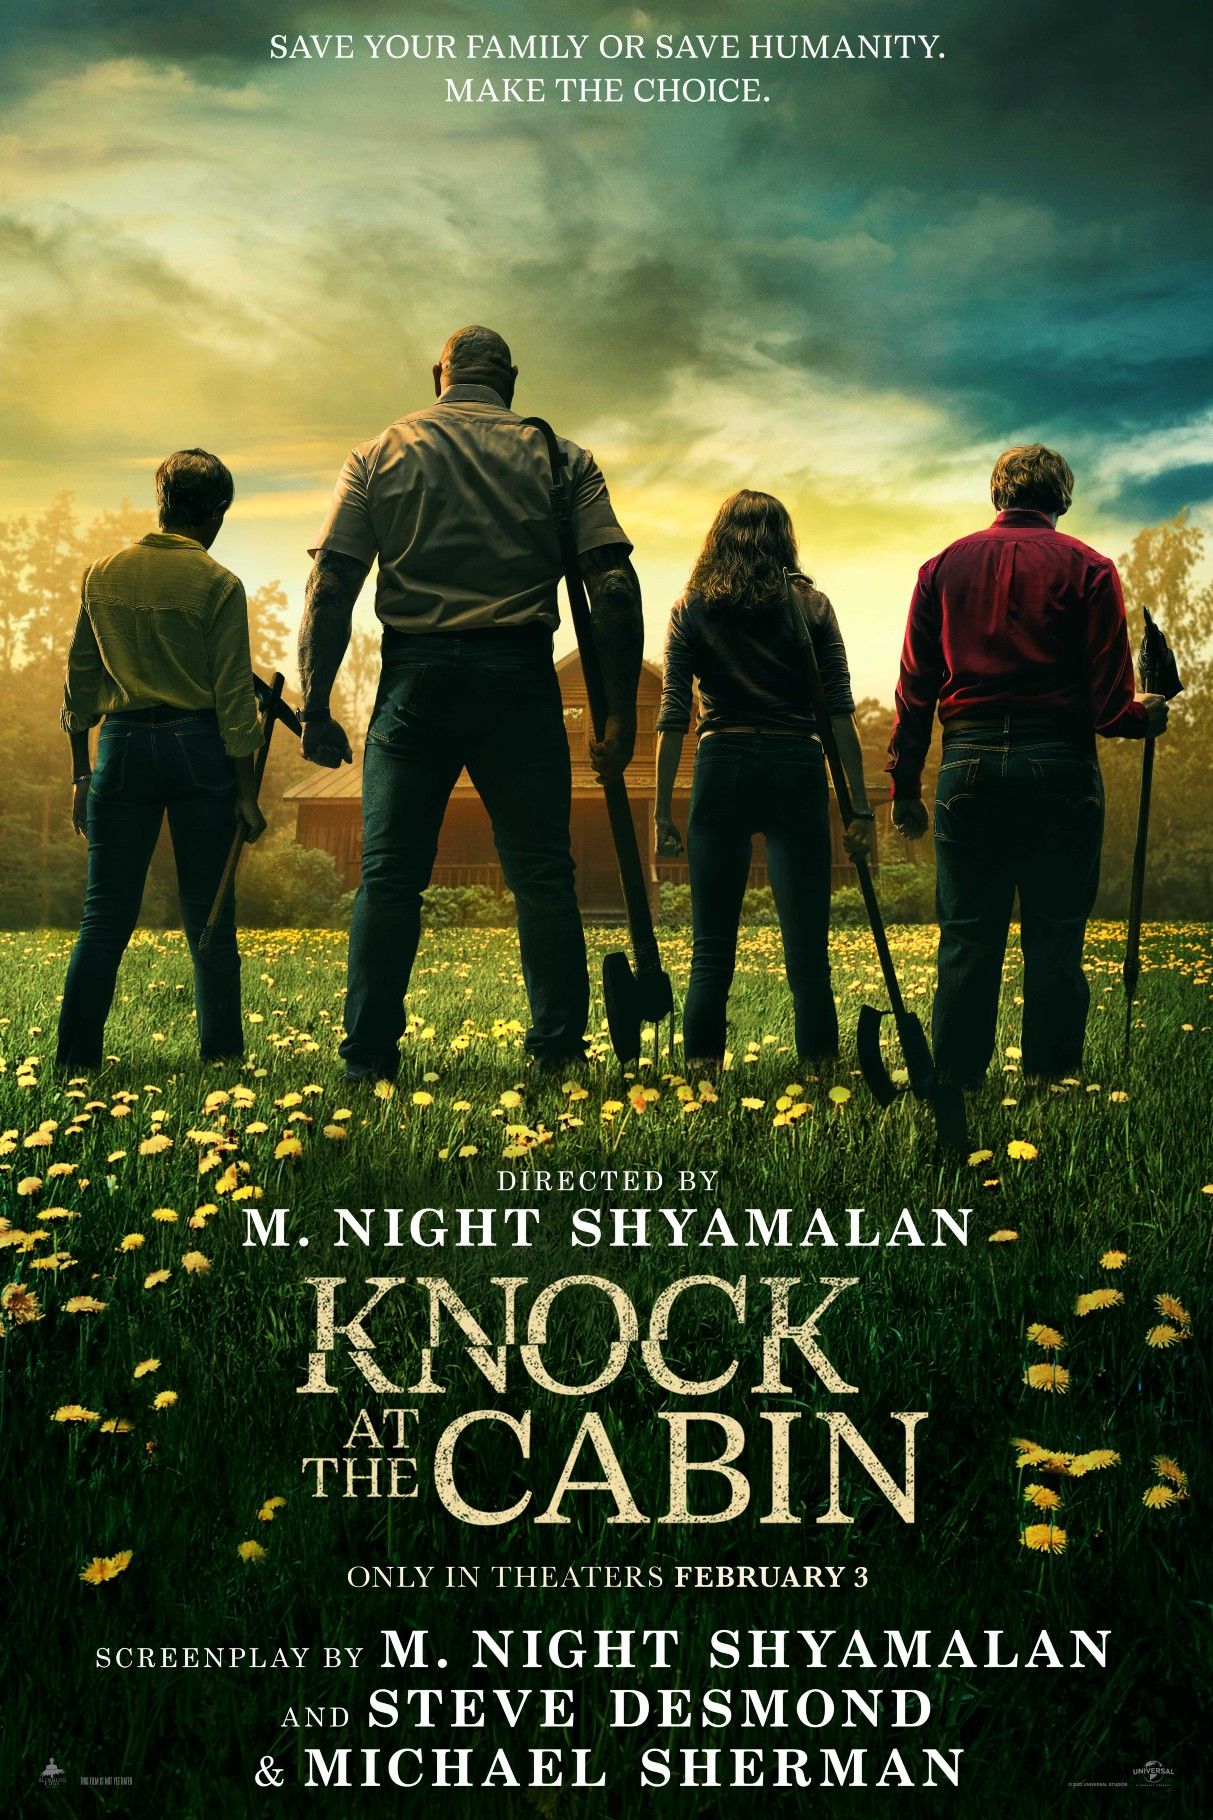 Knock in the cabin Poster-1